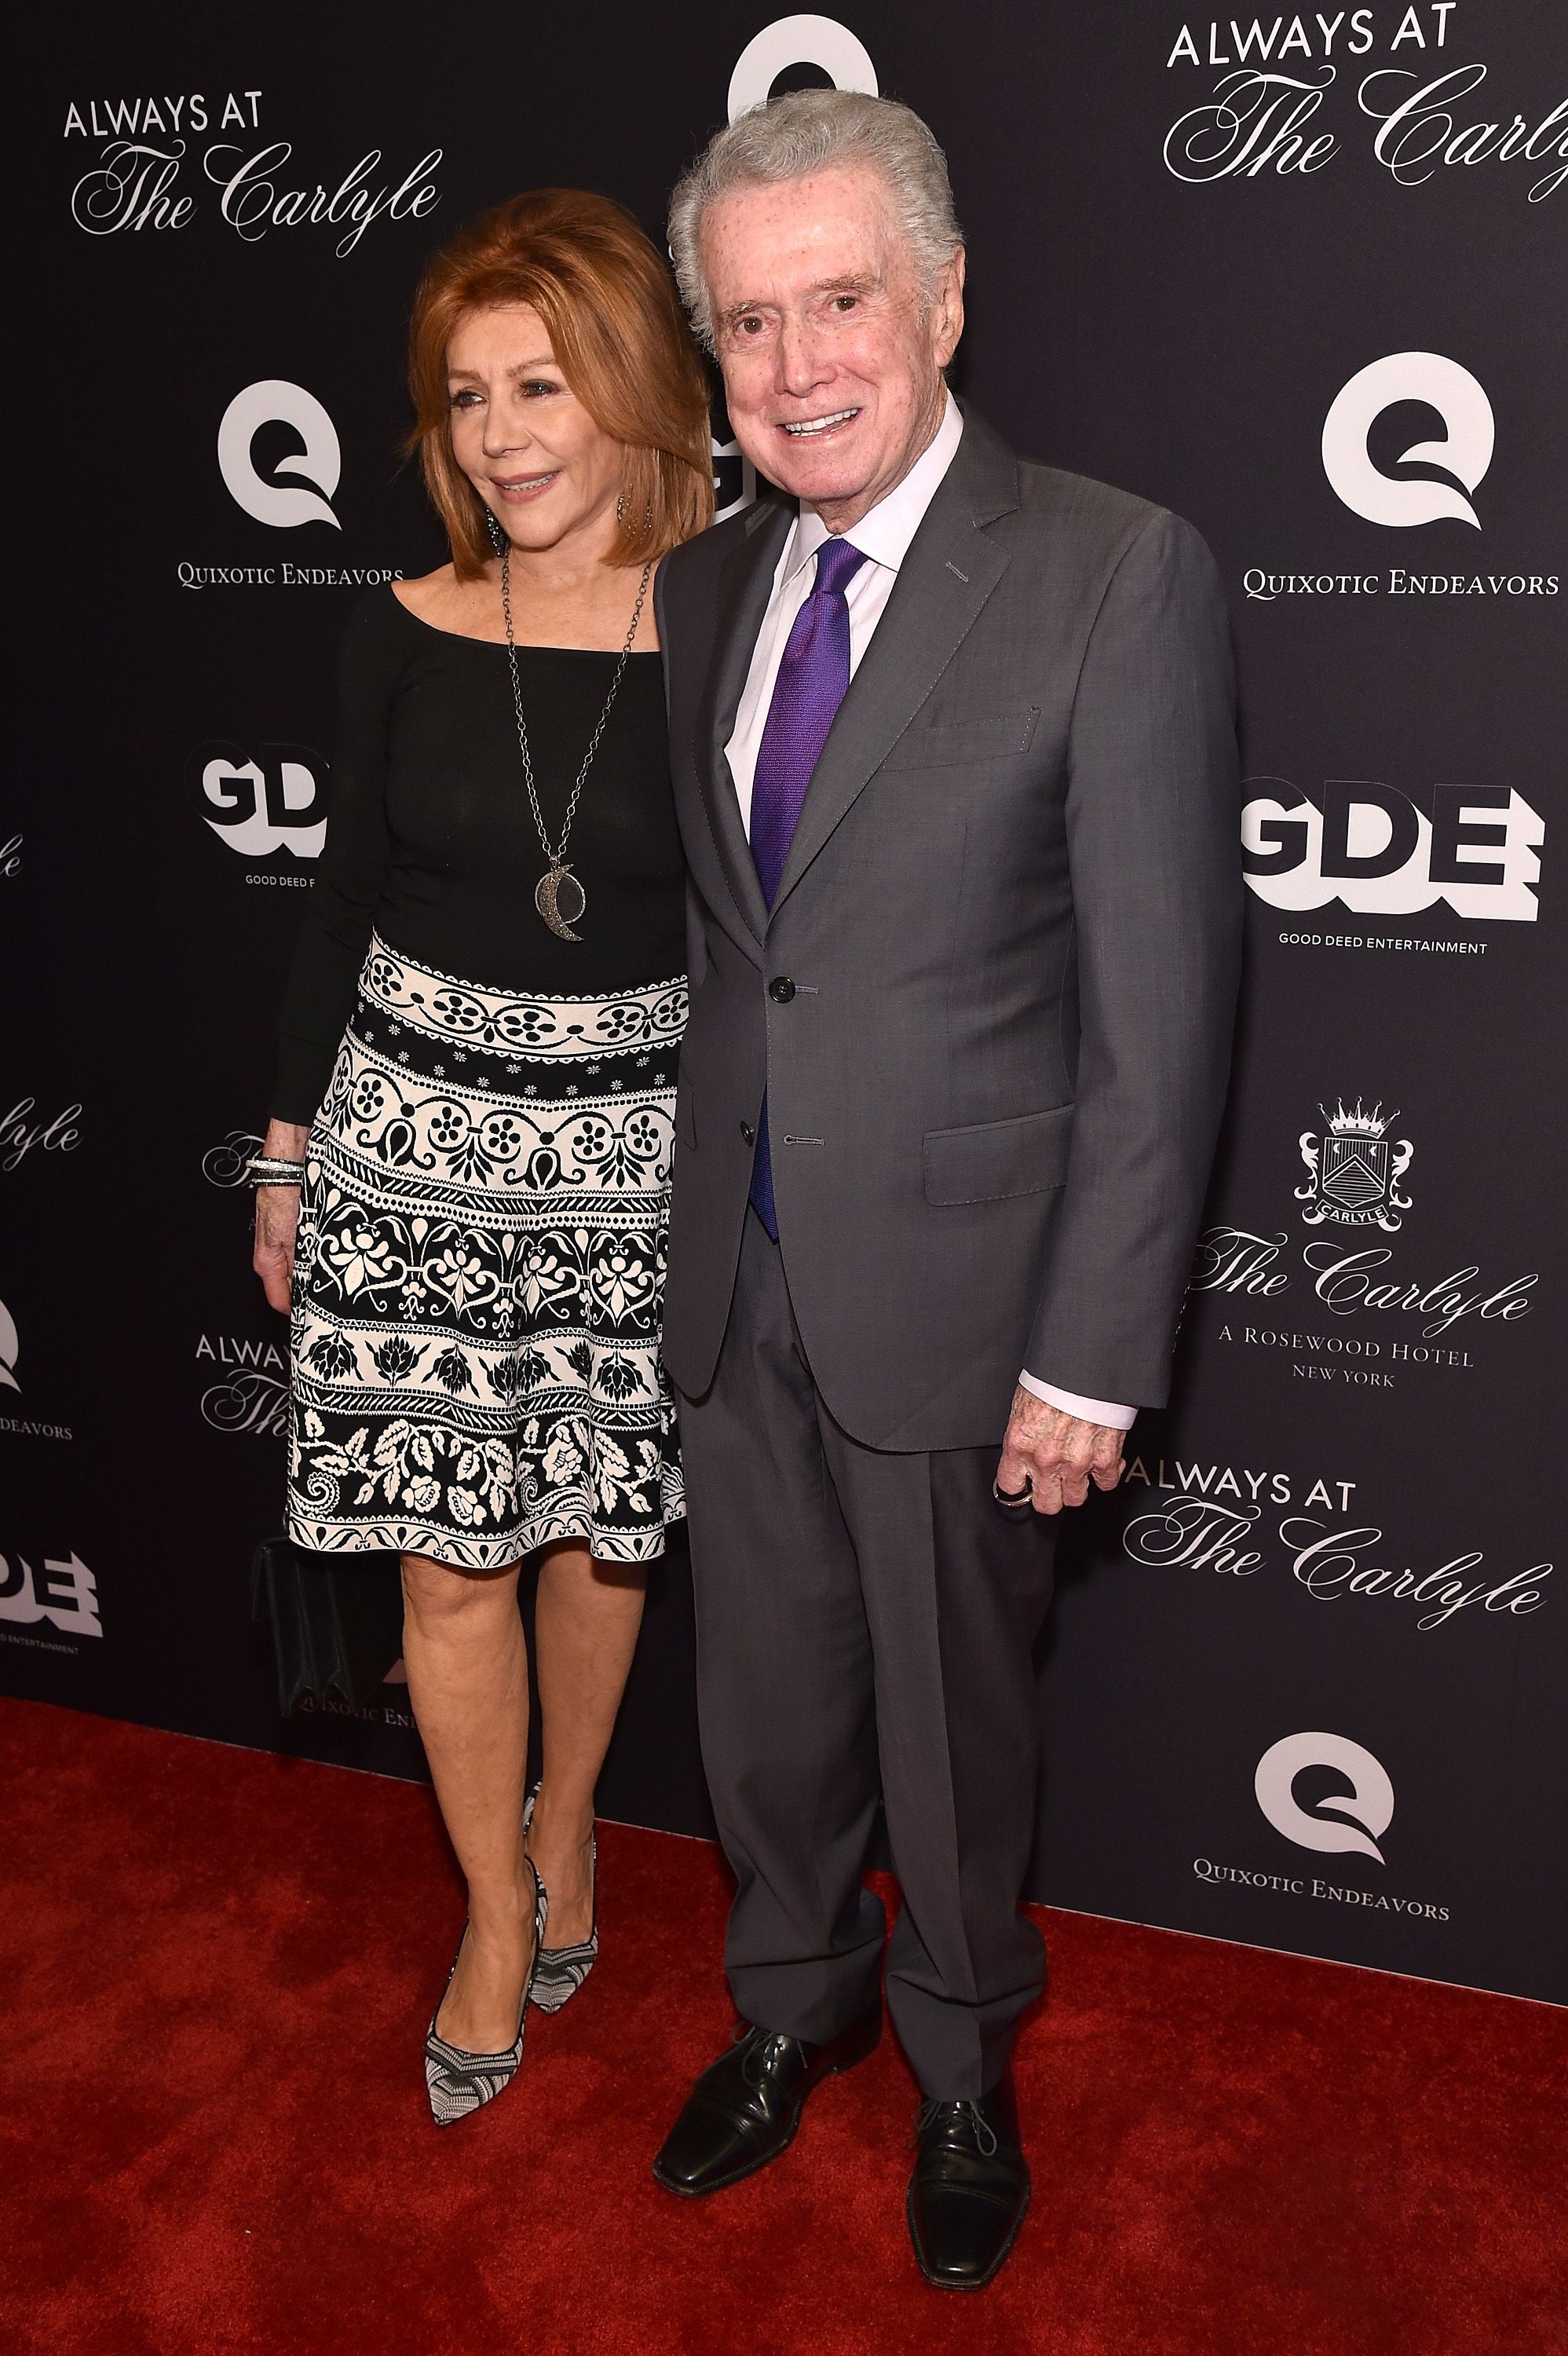 Regis Philbin with his wife Joy Philbin at the Always At The Carlyle Premiere in New York City | Photo: Getty Images